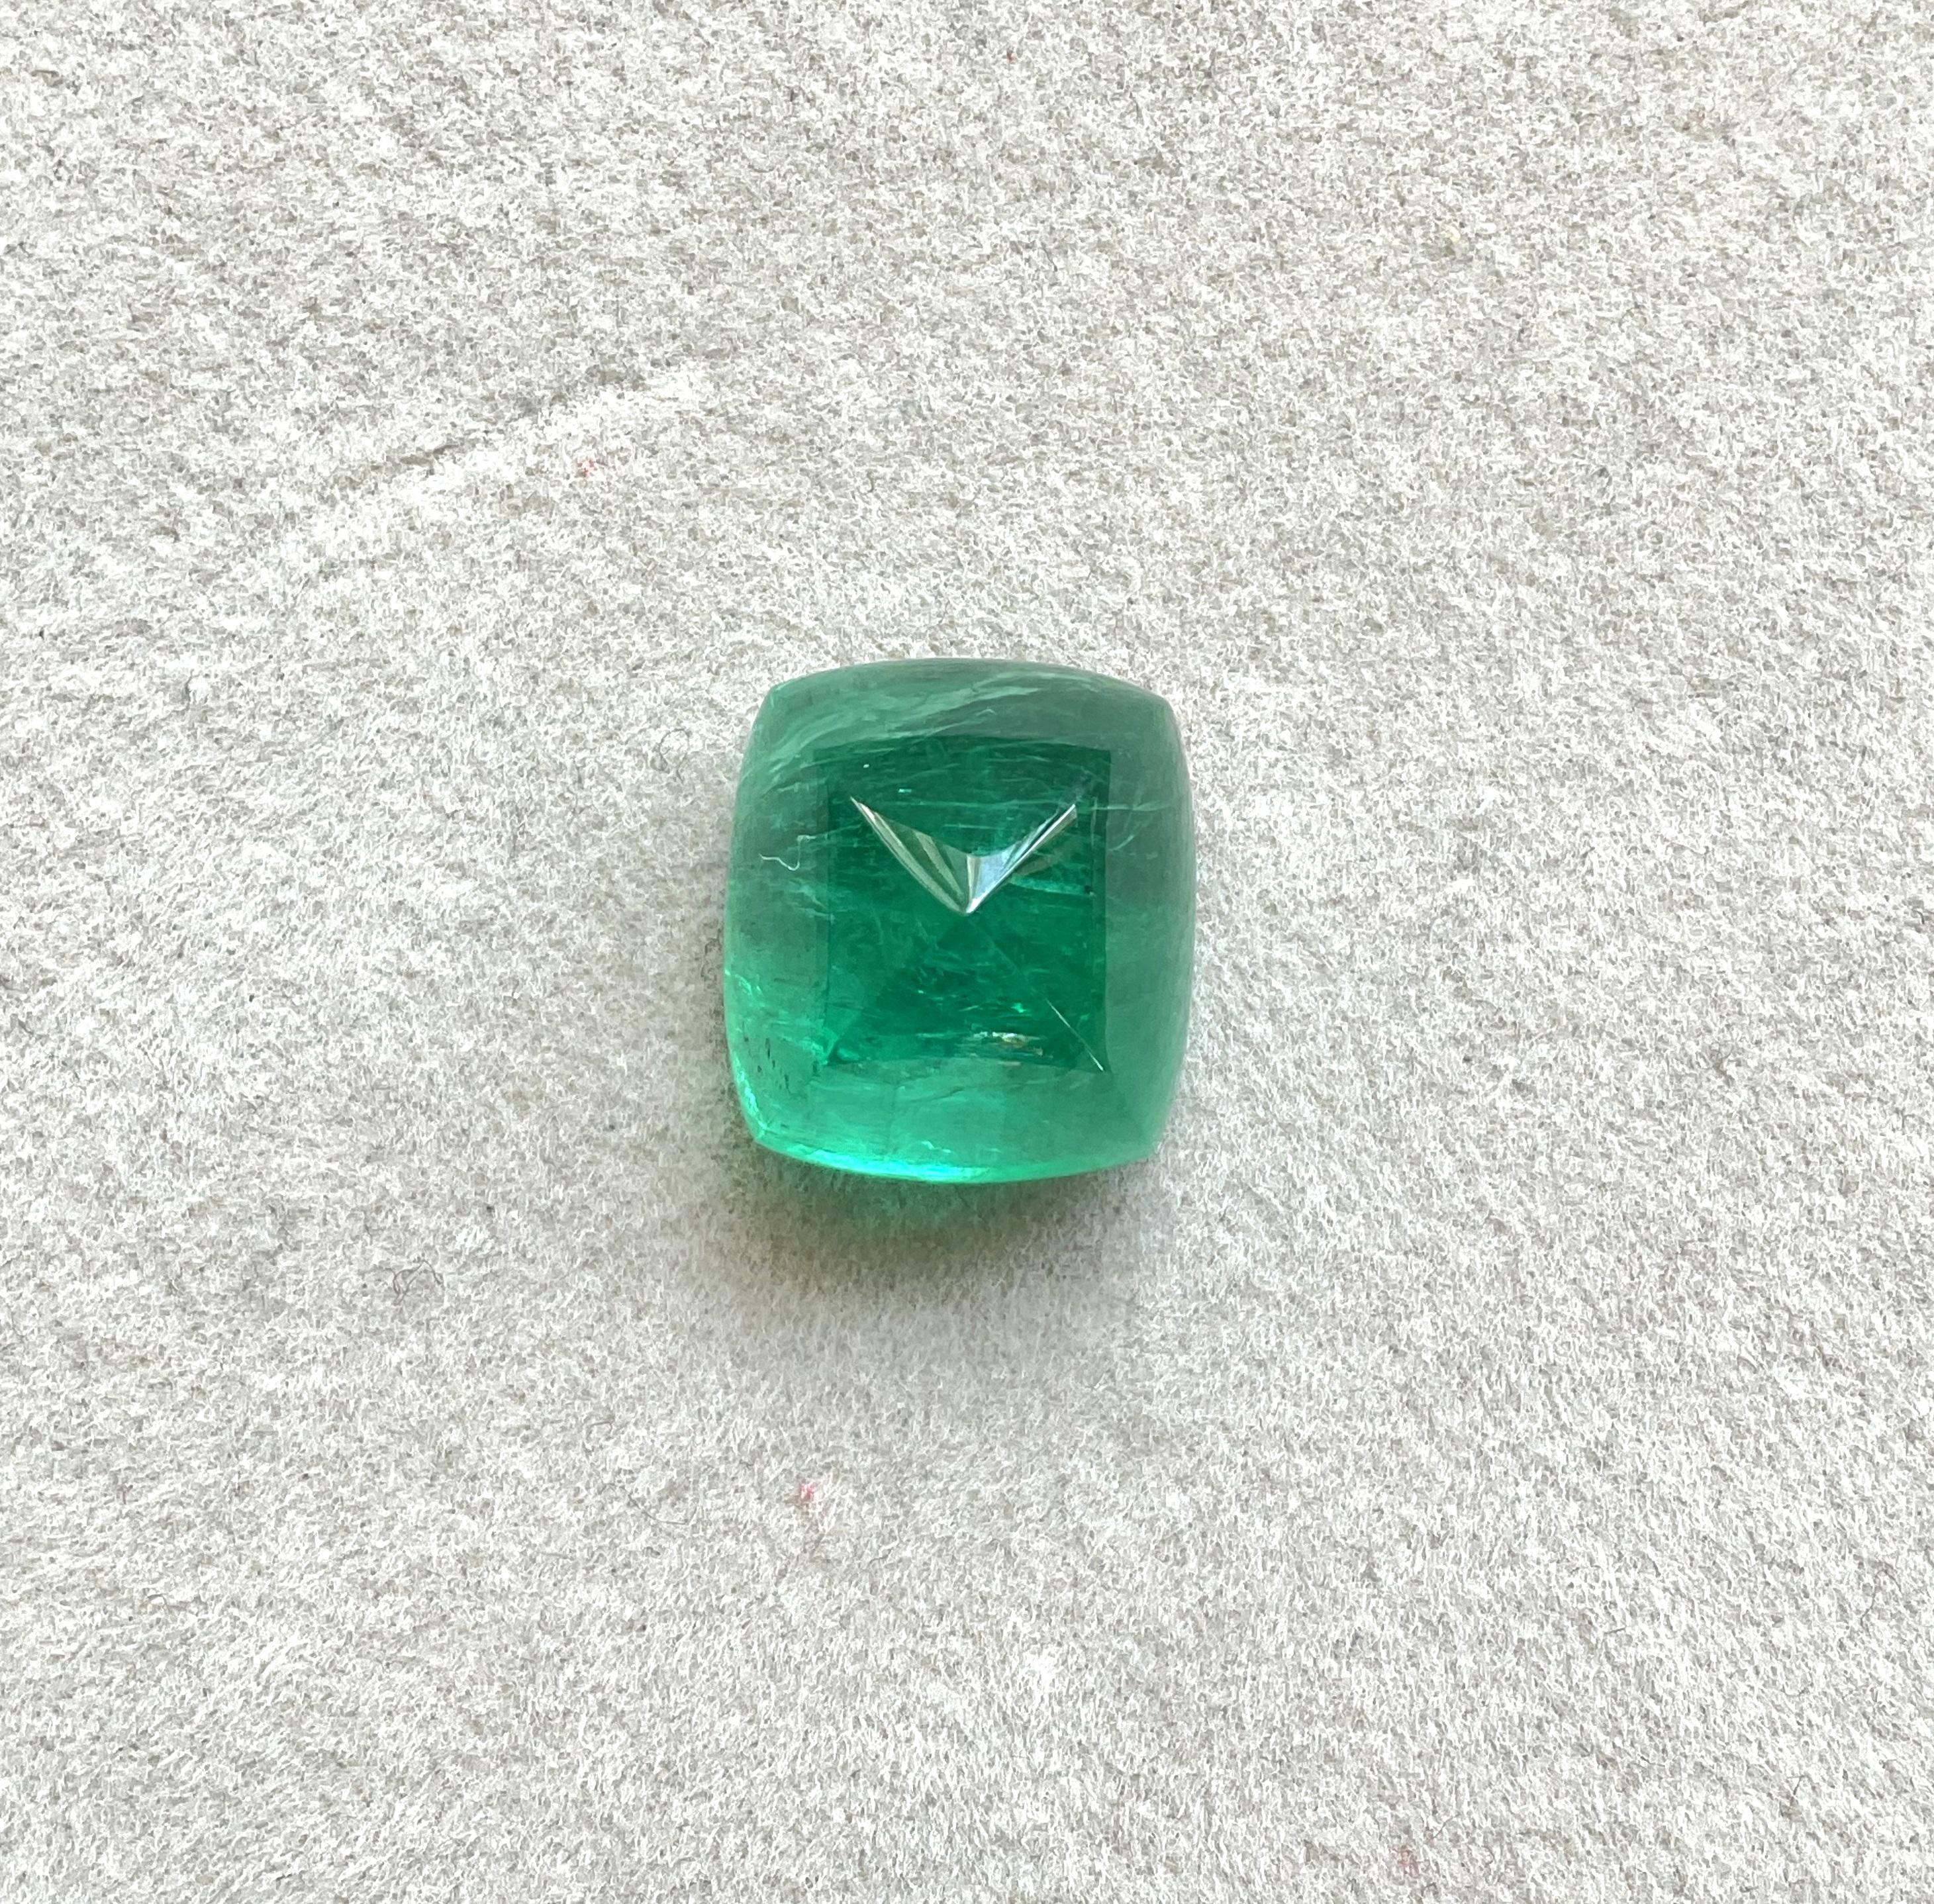 Women's or Men's Certified 25.38 Cts Zambian Emerald Sugarloaf Cabochon Top Quality Natural Gem For Sale